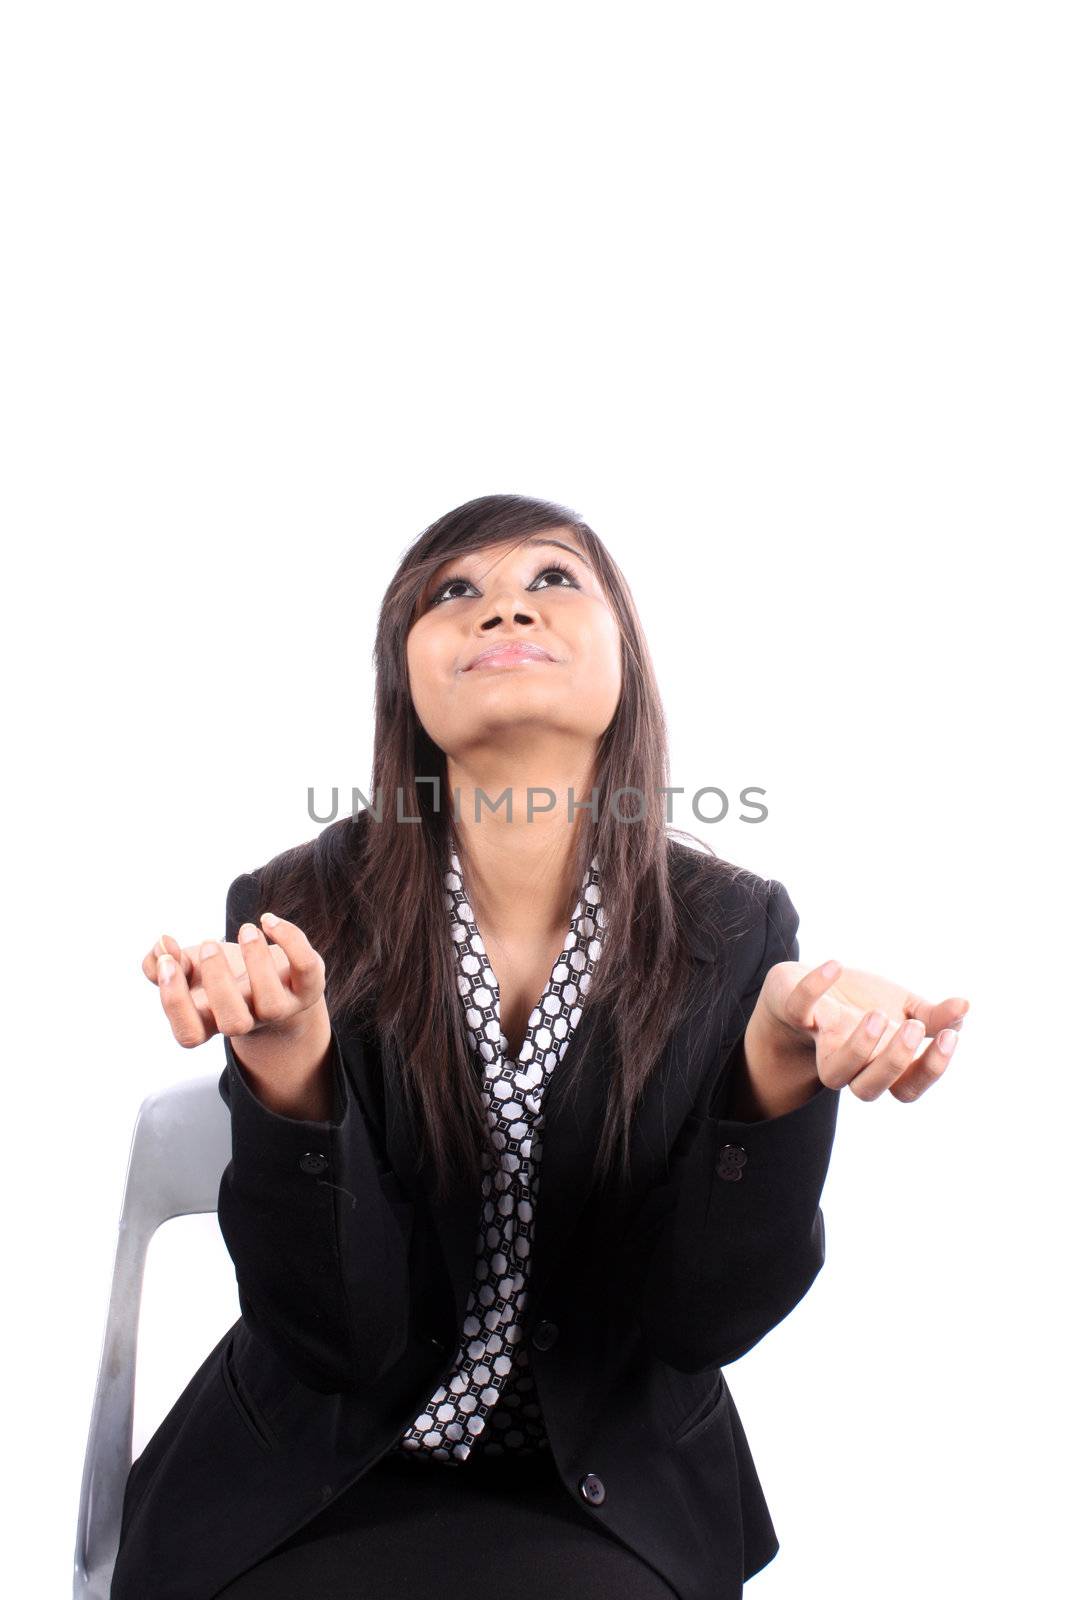 A metaphorical image of an Indian businesswomen praying for more success to god, on white studio background.